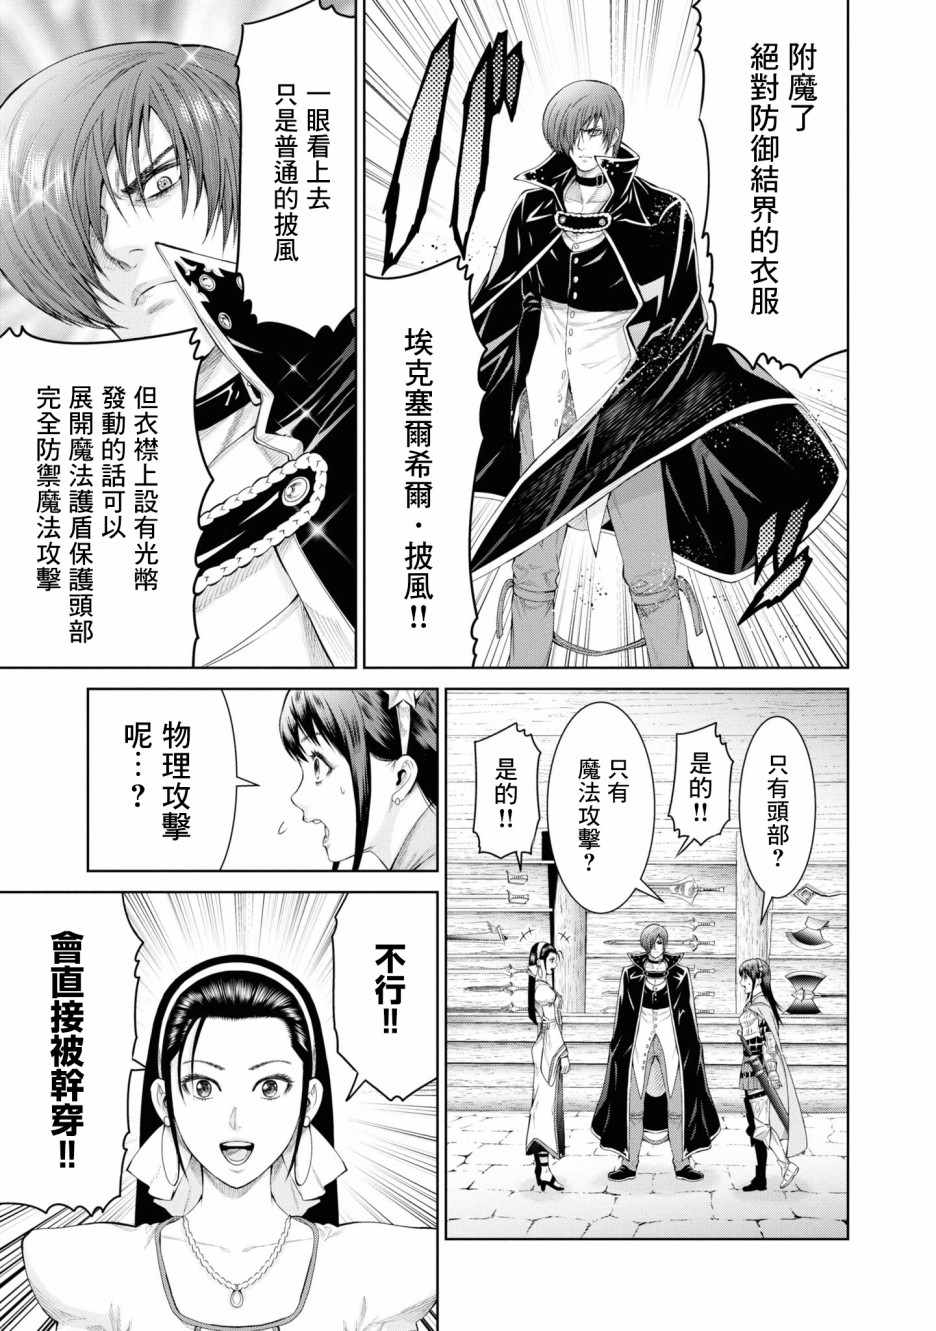 《THE KING OF FANTASY 八神庵的异世界无双》漫画 八神庵的异世界无双 004集